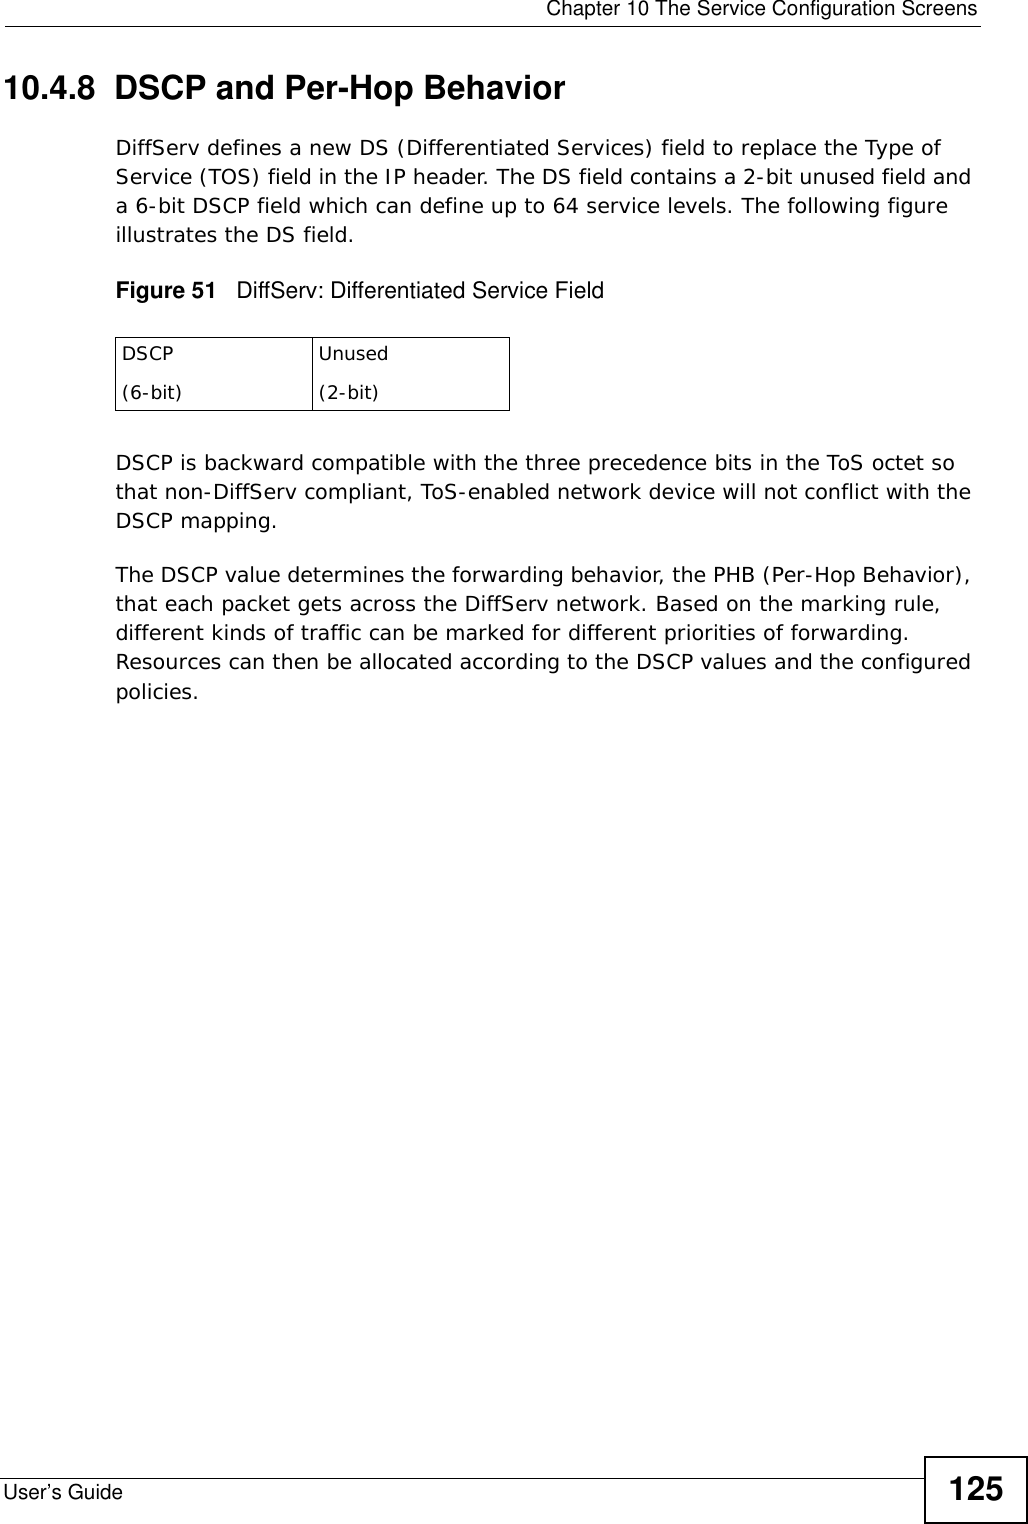  Chapter 10 The Service Configuration ScreensUser’s Guide 12510.4.8  DSCP and Per-Hop Behavior DiffServ defines a new DS (Differentiated Services) field to replace the Type of Service (TOS) field in the IP header. The DS field contains a 2-bit unused field and a 6-bit DSCP field which can define up to 64 service levels. The following figure illustrates the DS field. Figure 51   DiffServ: Differentiated Service FieldDSCP is backward compatible with the three precedence bits in the ToS octet so that non-DiffServ compliant, ToS-enabled network device will not conflict with the DSCP mapping. The DSCP value determines the forwarding behavior, the PHB (Per-Hop Behavior), that each packet gets across the DiffServ network. Based on the marking rule, different kinds of traffic can be marked for different priorities of forwarding. Resources can then be allocated according to the DSCP values and the configured policies.DSCP(6-bit)Unused(2-bit)